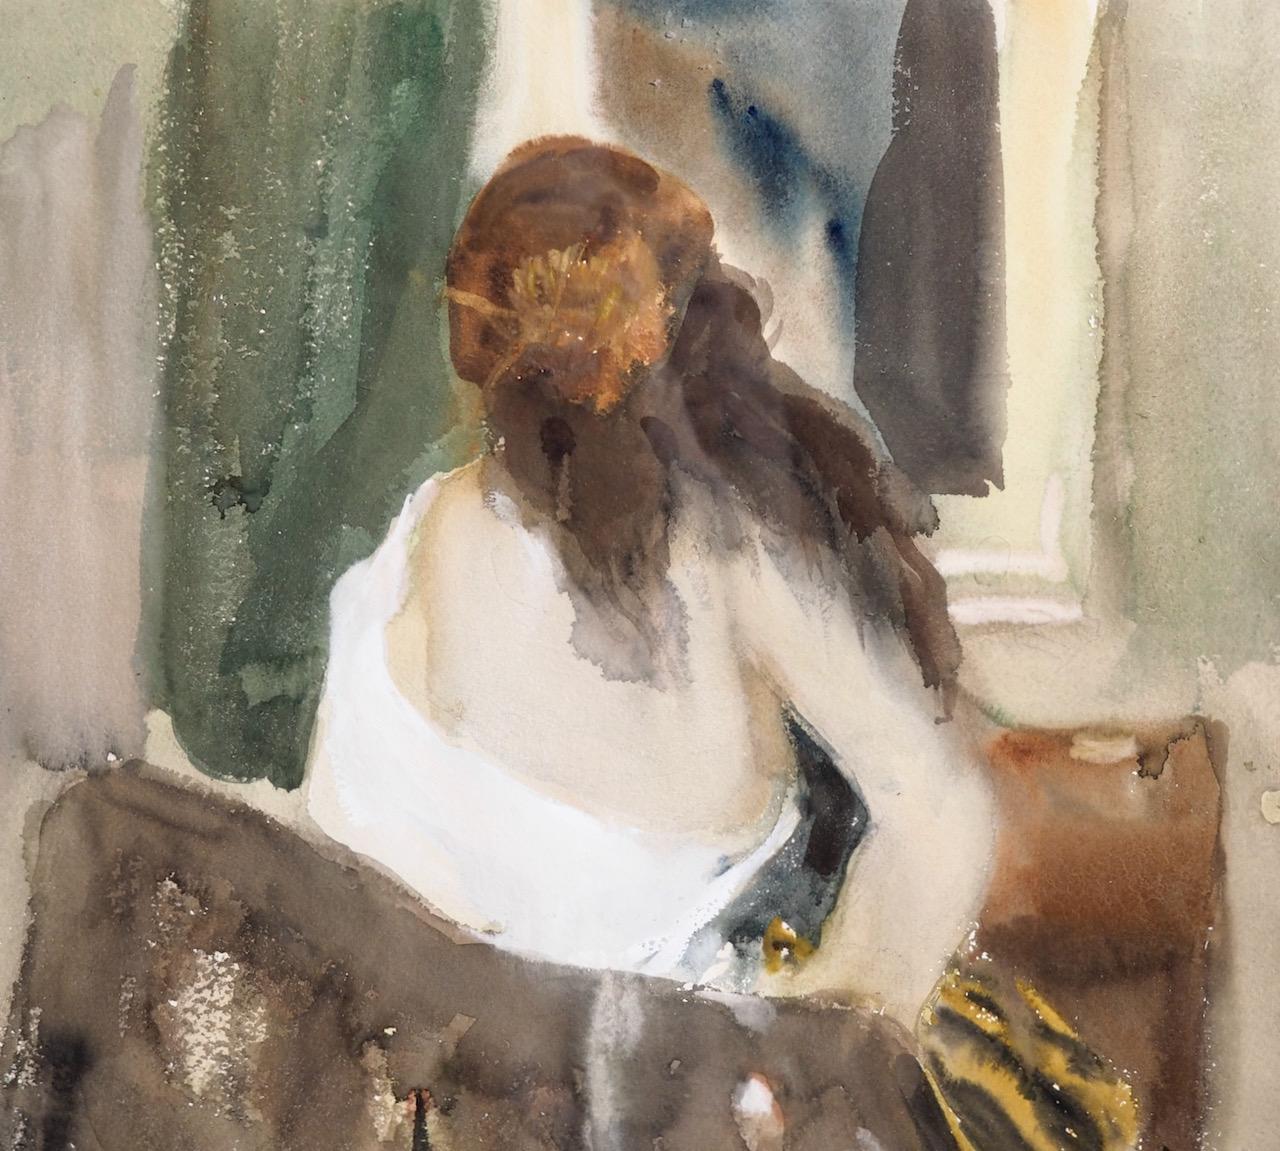 Very fine watercolor by Carl Fischer (1887-1962) of a back of a girl with original frame. Signed “Carl Fischer”. Carl Fischer was one of the most important Danish impressionist painters, 19th century.

Measures: With frame:
H 67 W. 57 cm
H 26.3